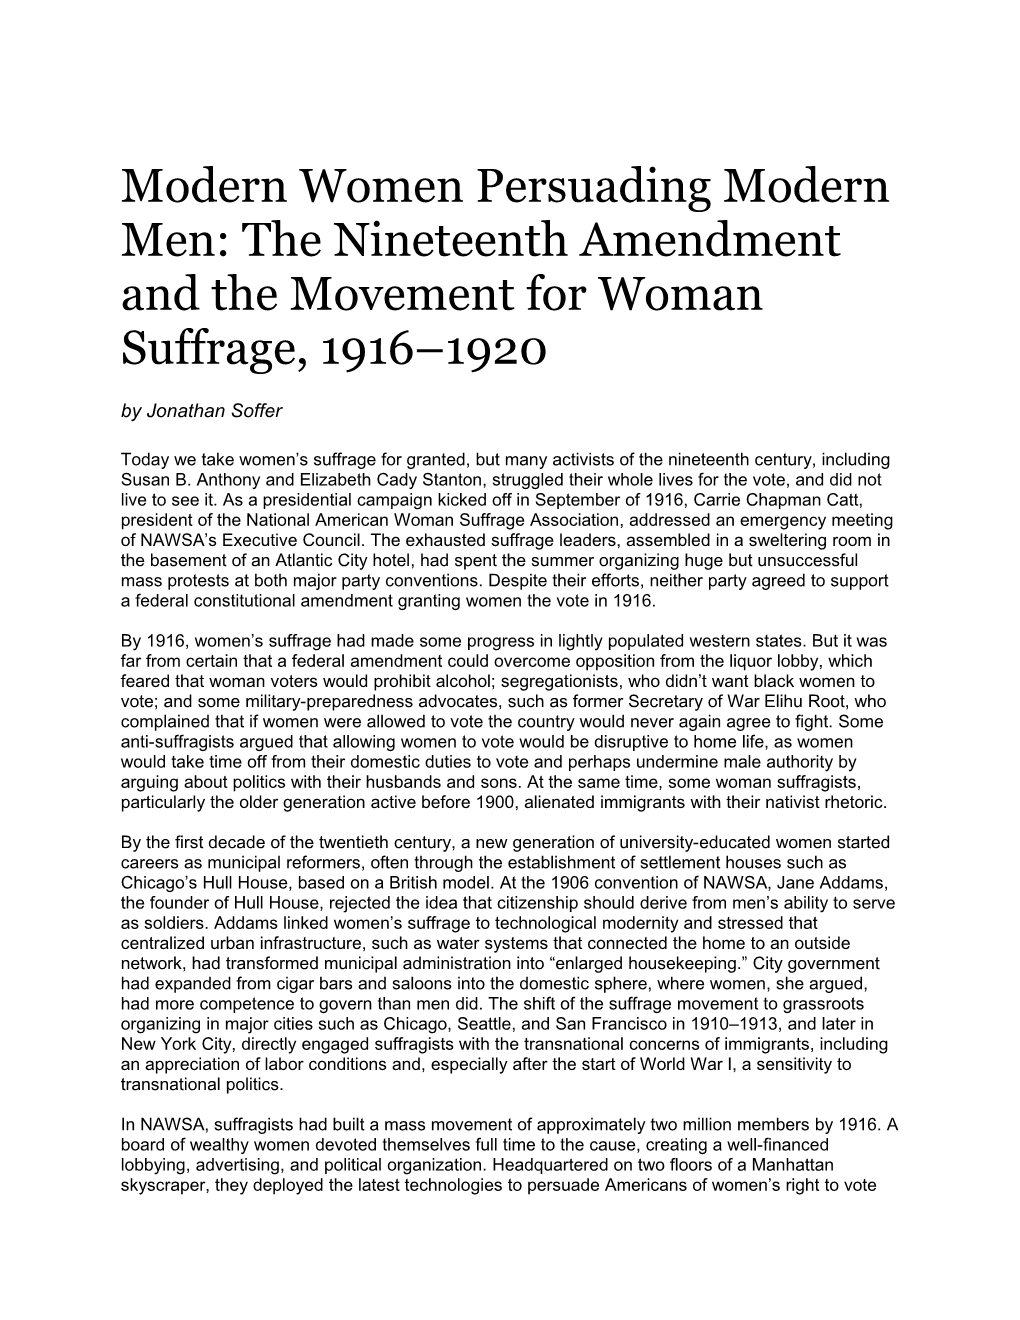 Modern Women Persuading Modern Men: the Nineteenth Amendment and the Movement for Woman